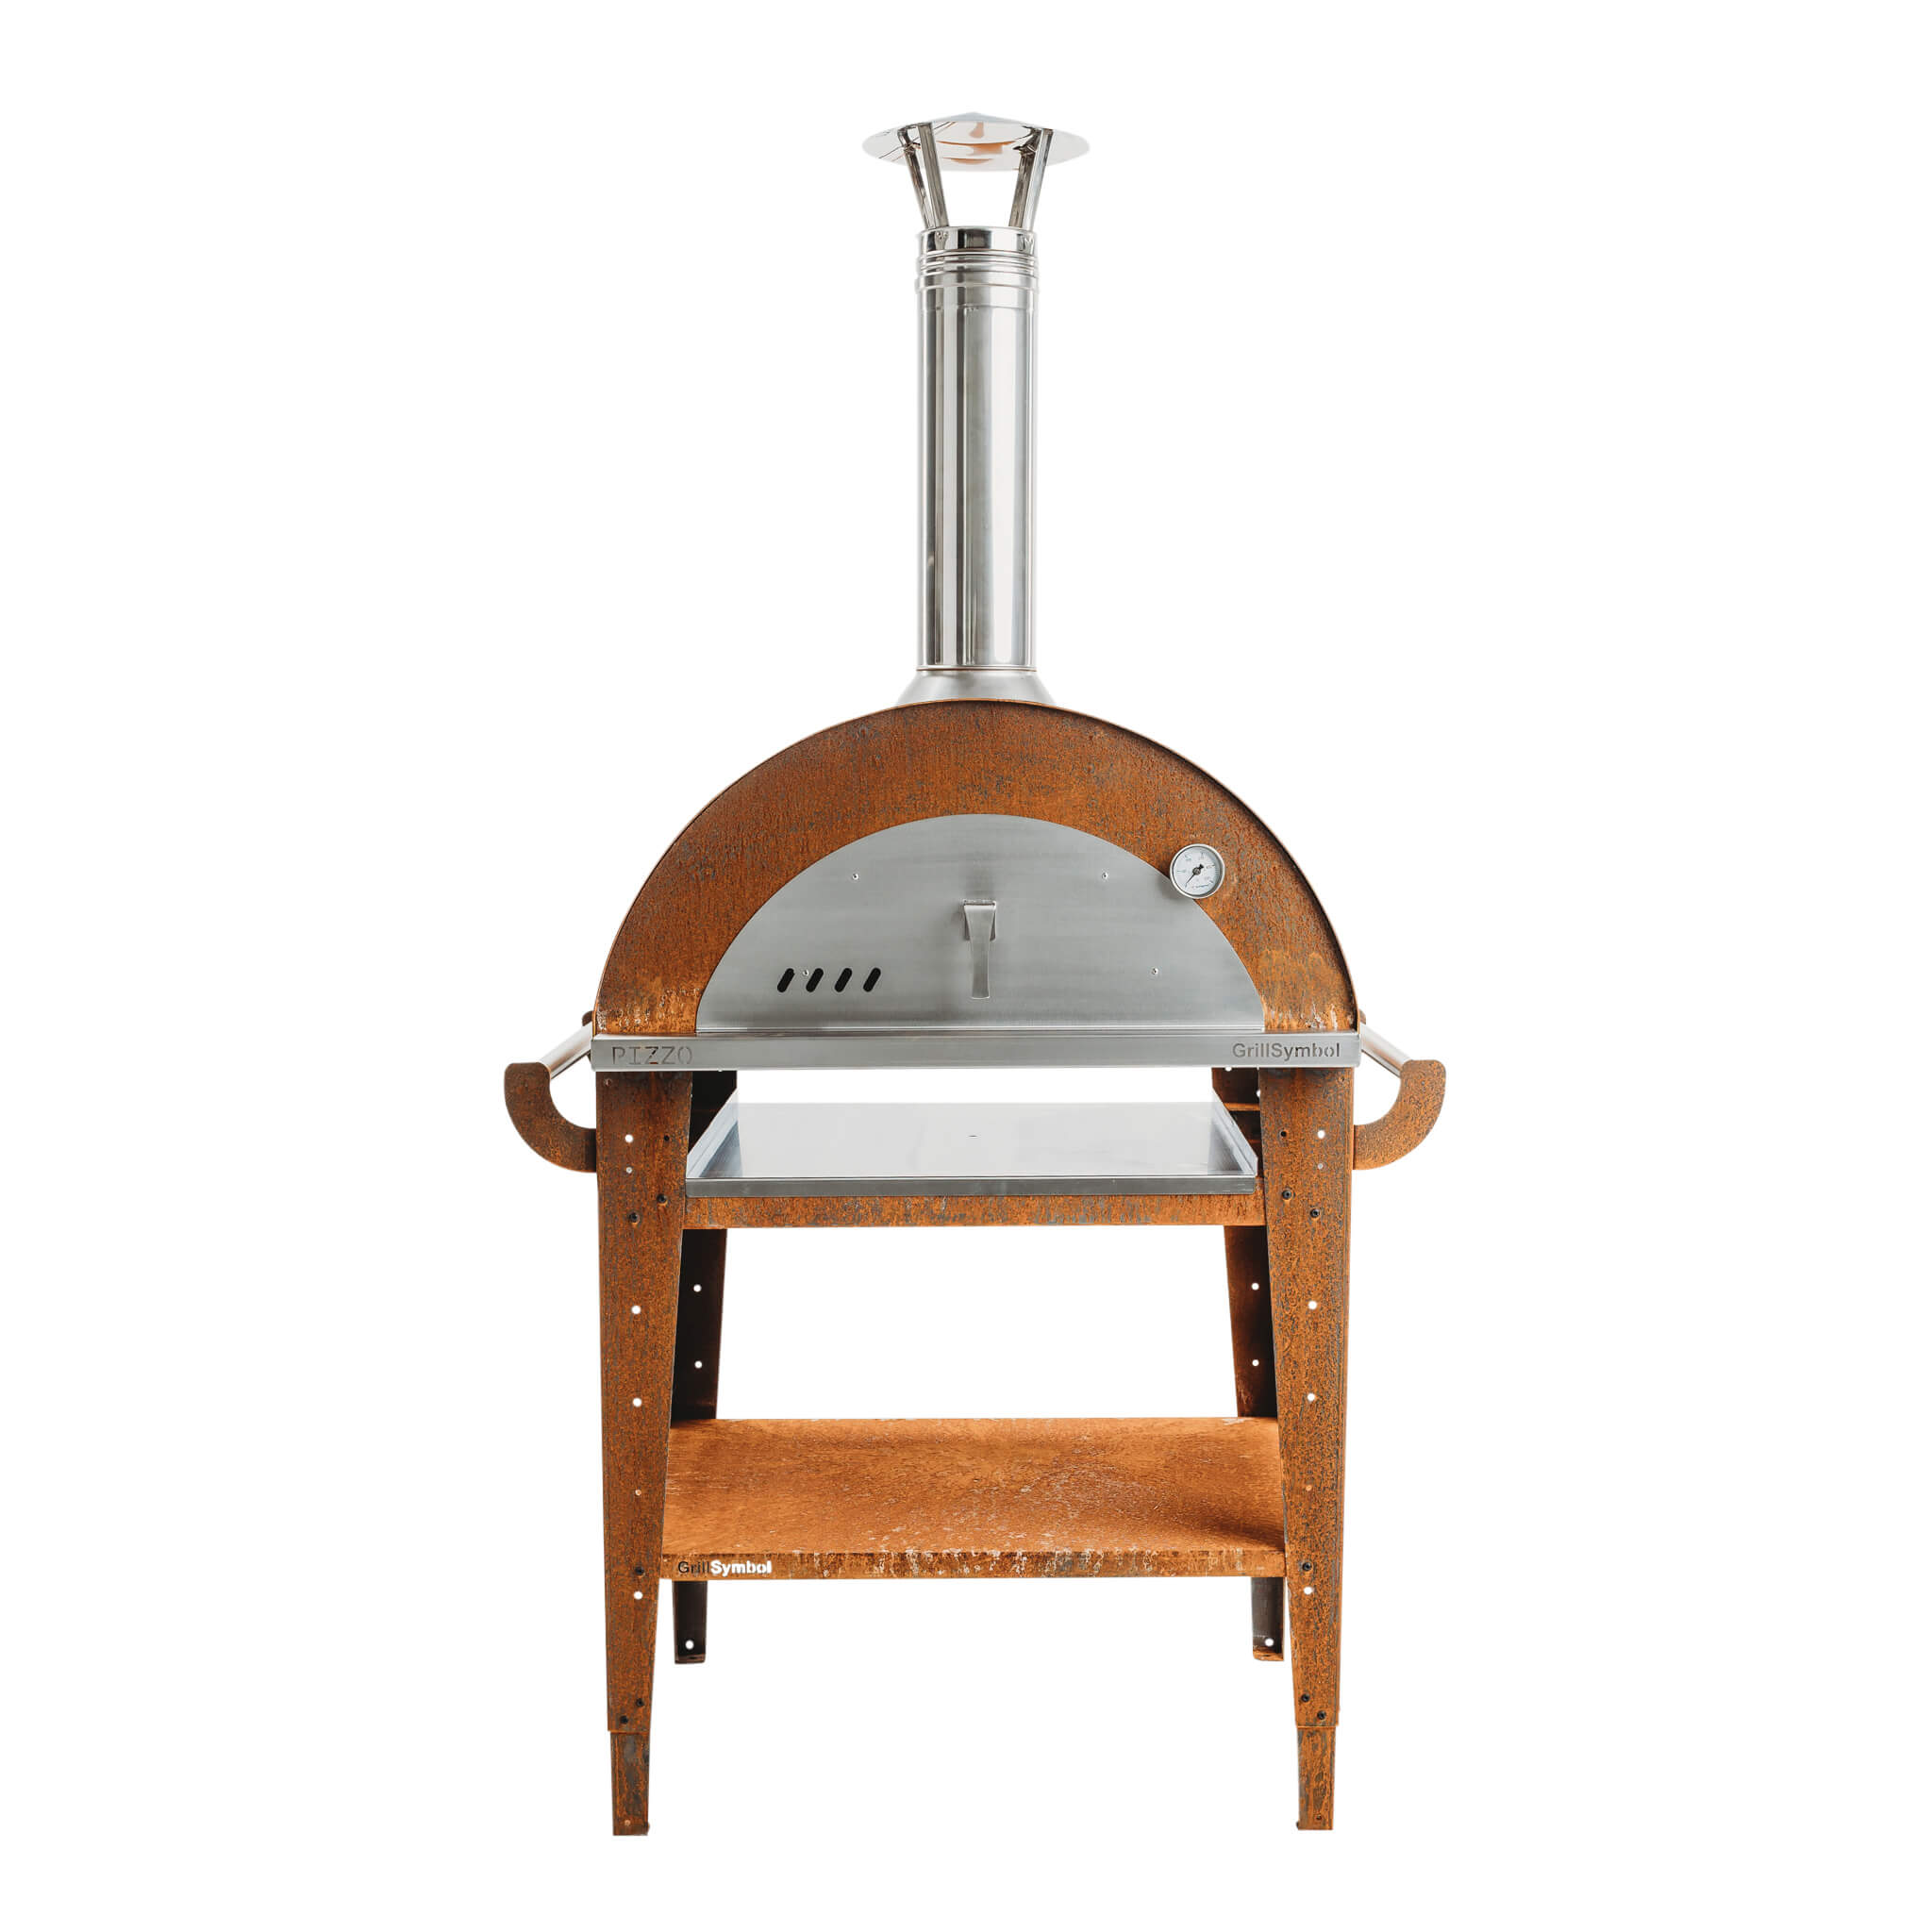 GrillSymbol Wood Fired Pizza Oven with Stand Pizzo-set